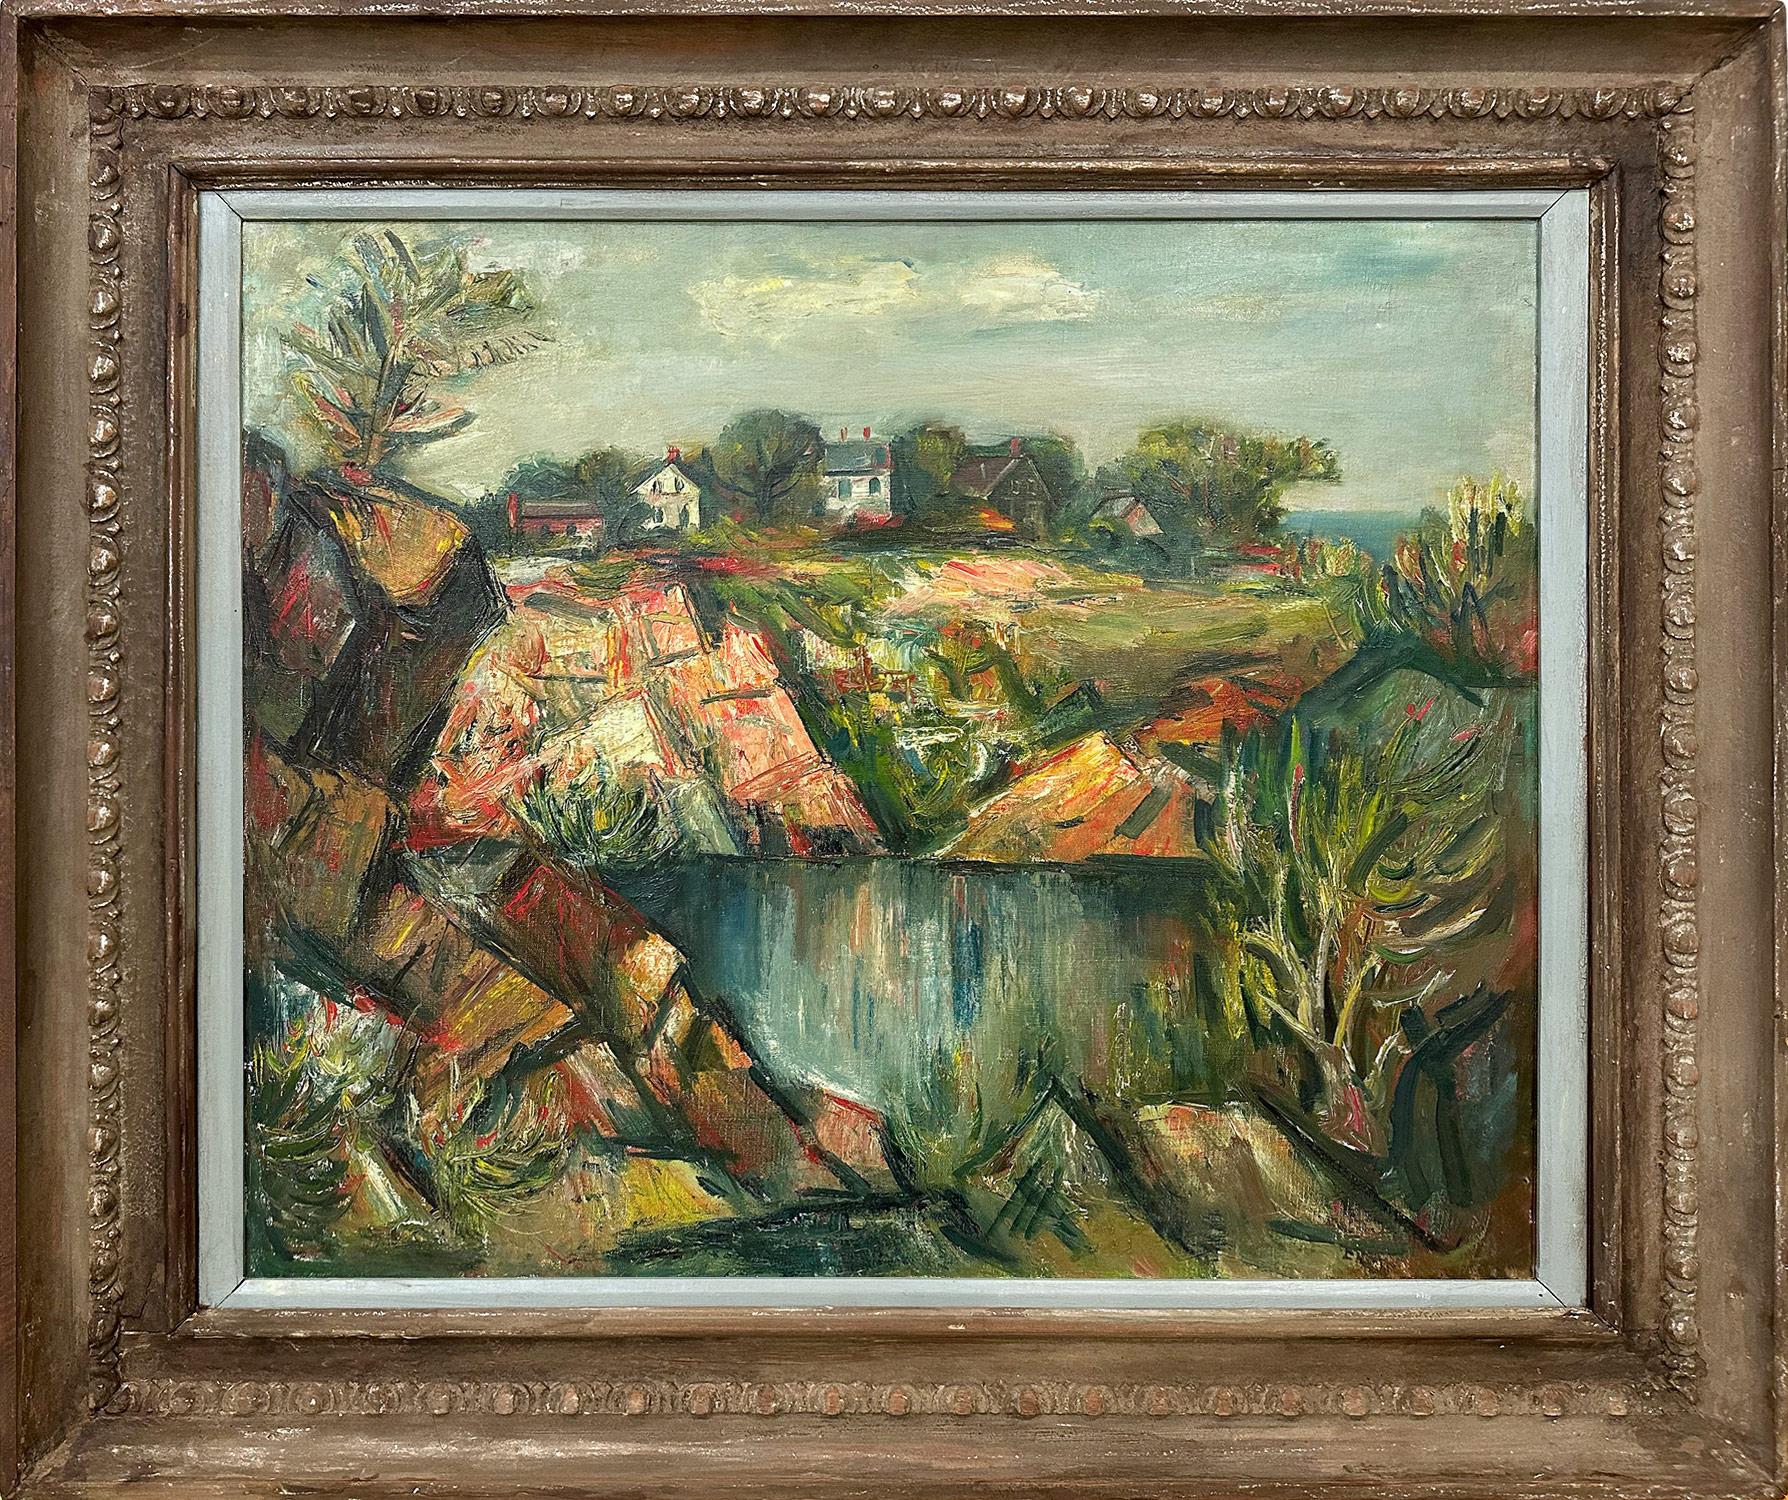 Jacques Zucker Landscape Painting - "Rockport Quarry" Impressionistic Oil Painting Landscape Overlooking Houses